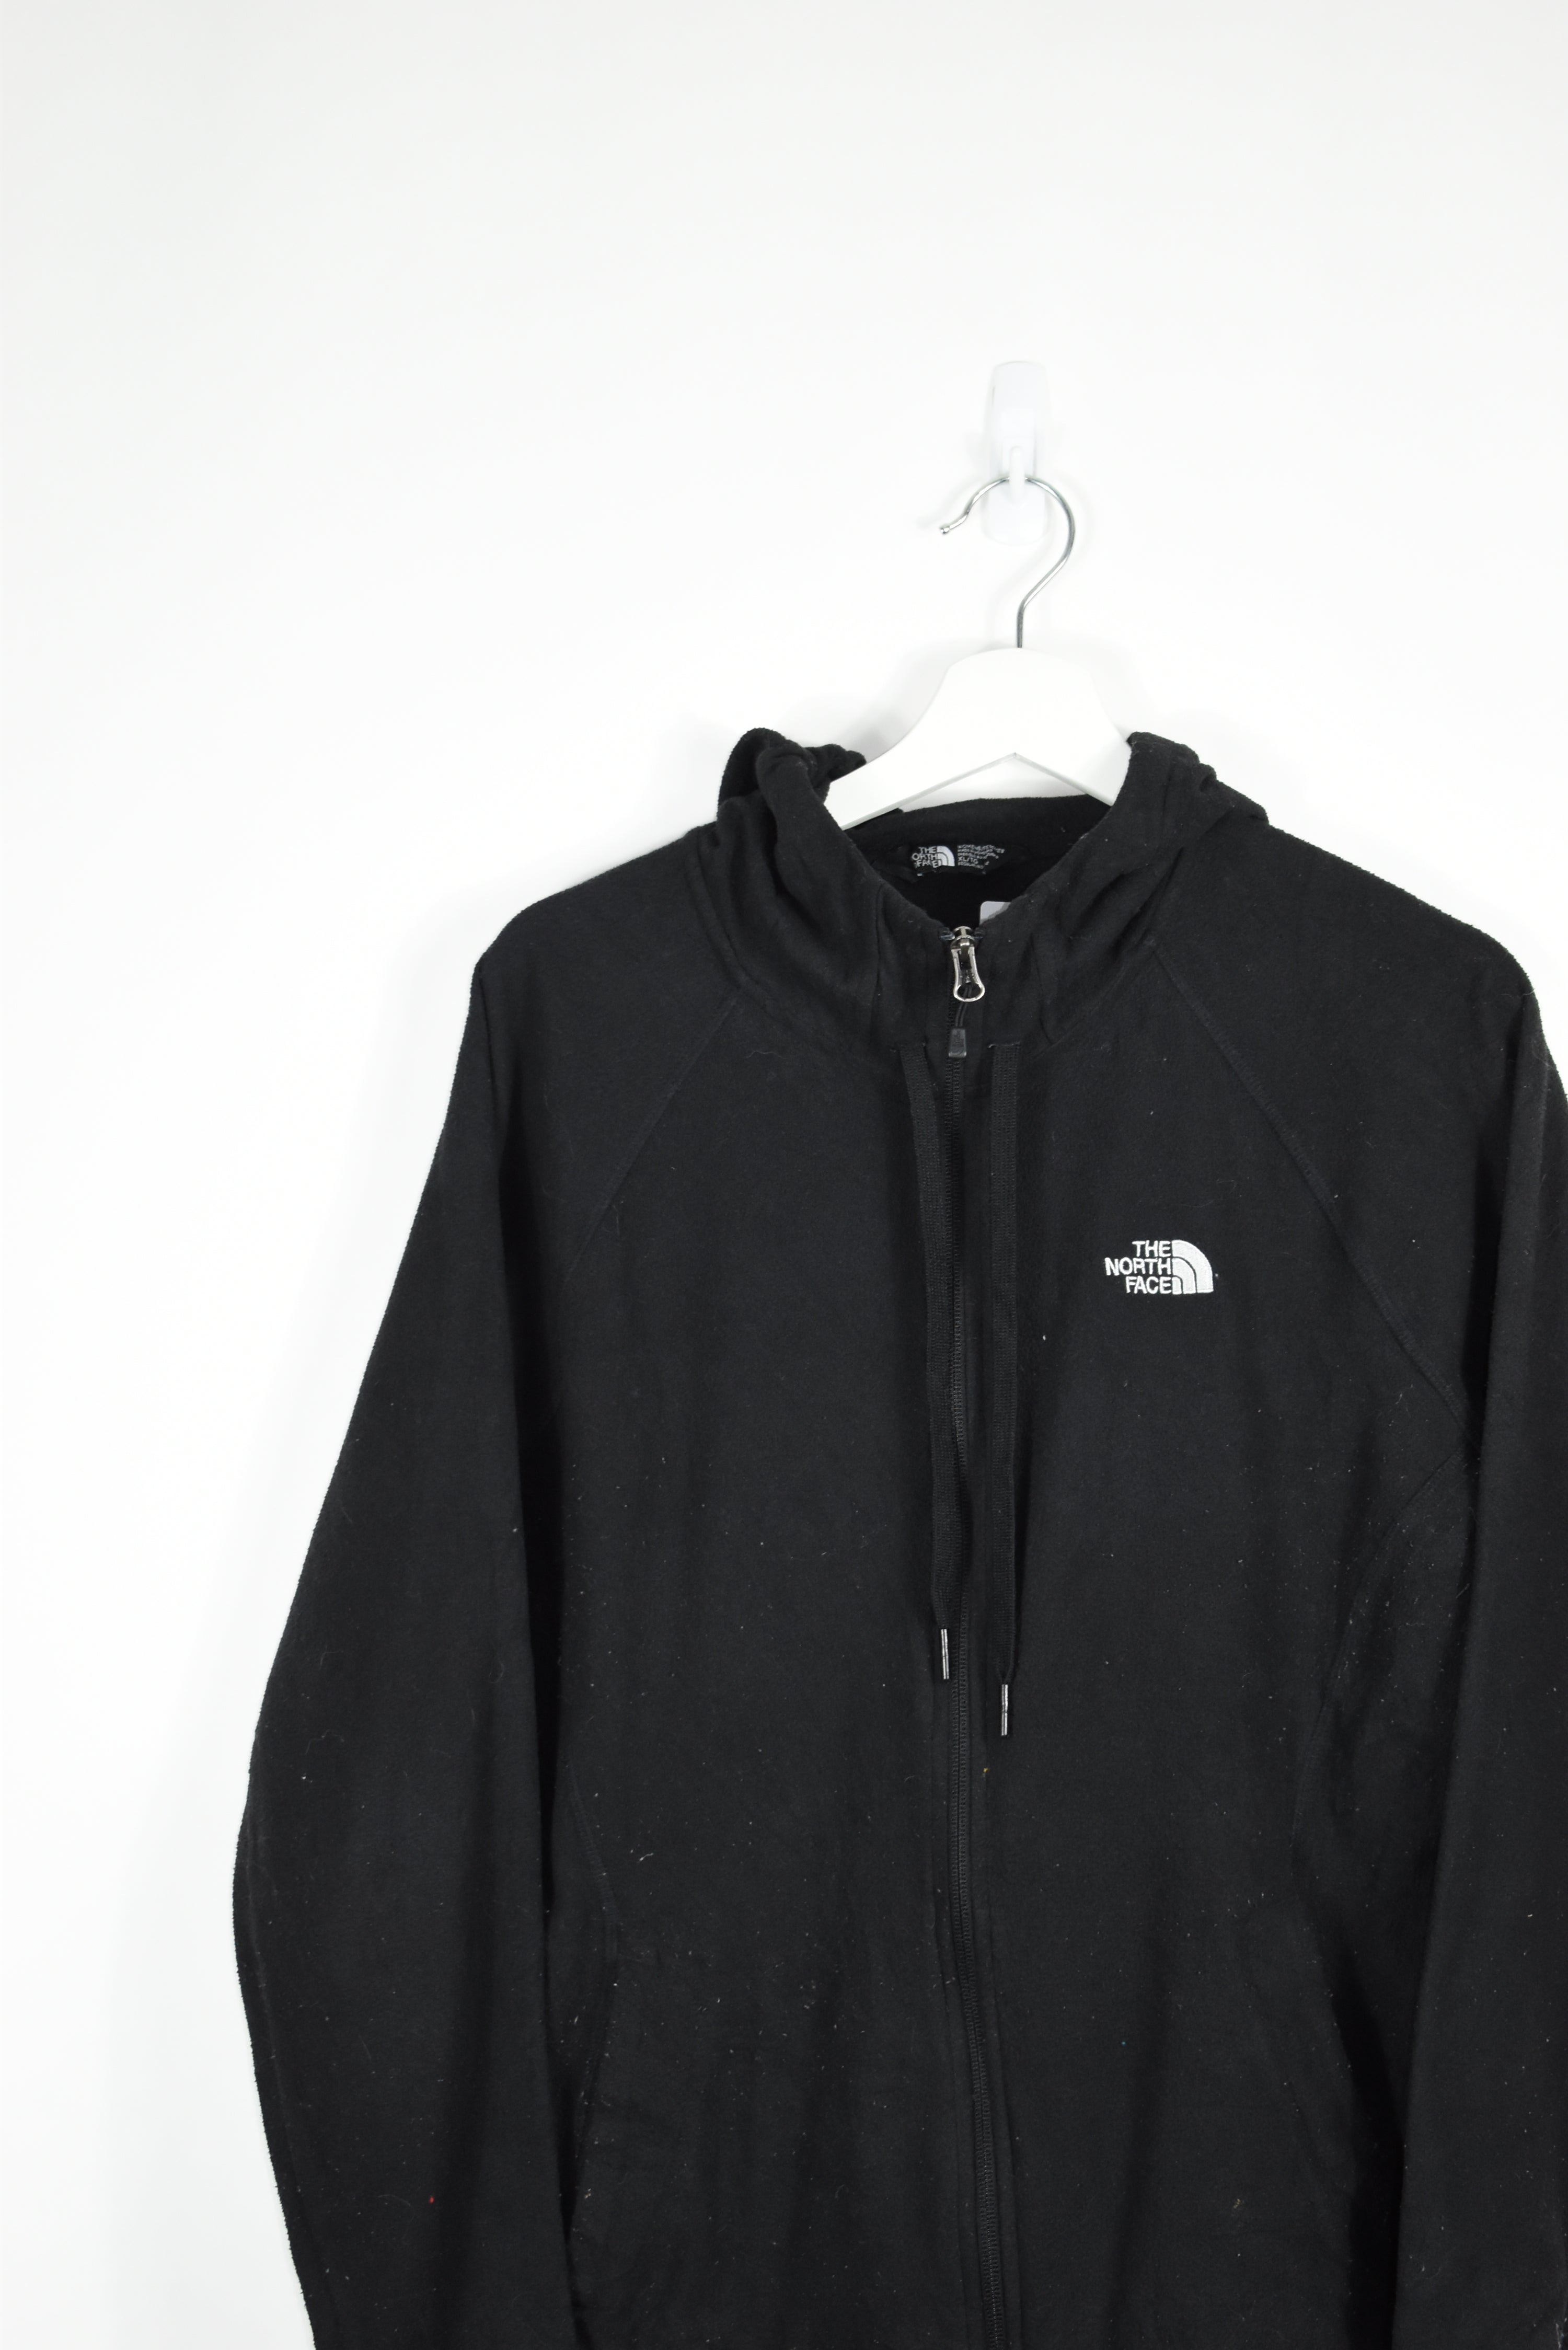 Vintage North Face Hooded Fleece SMALL